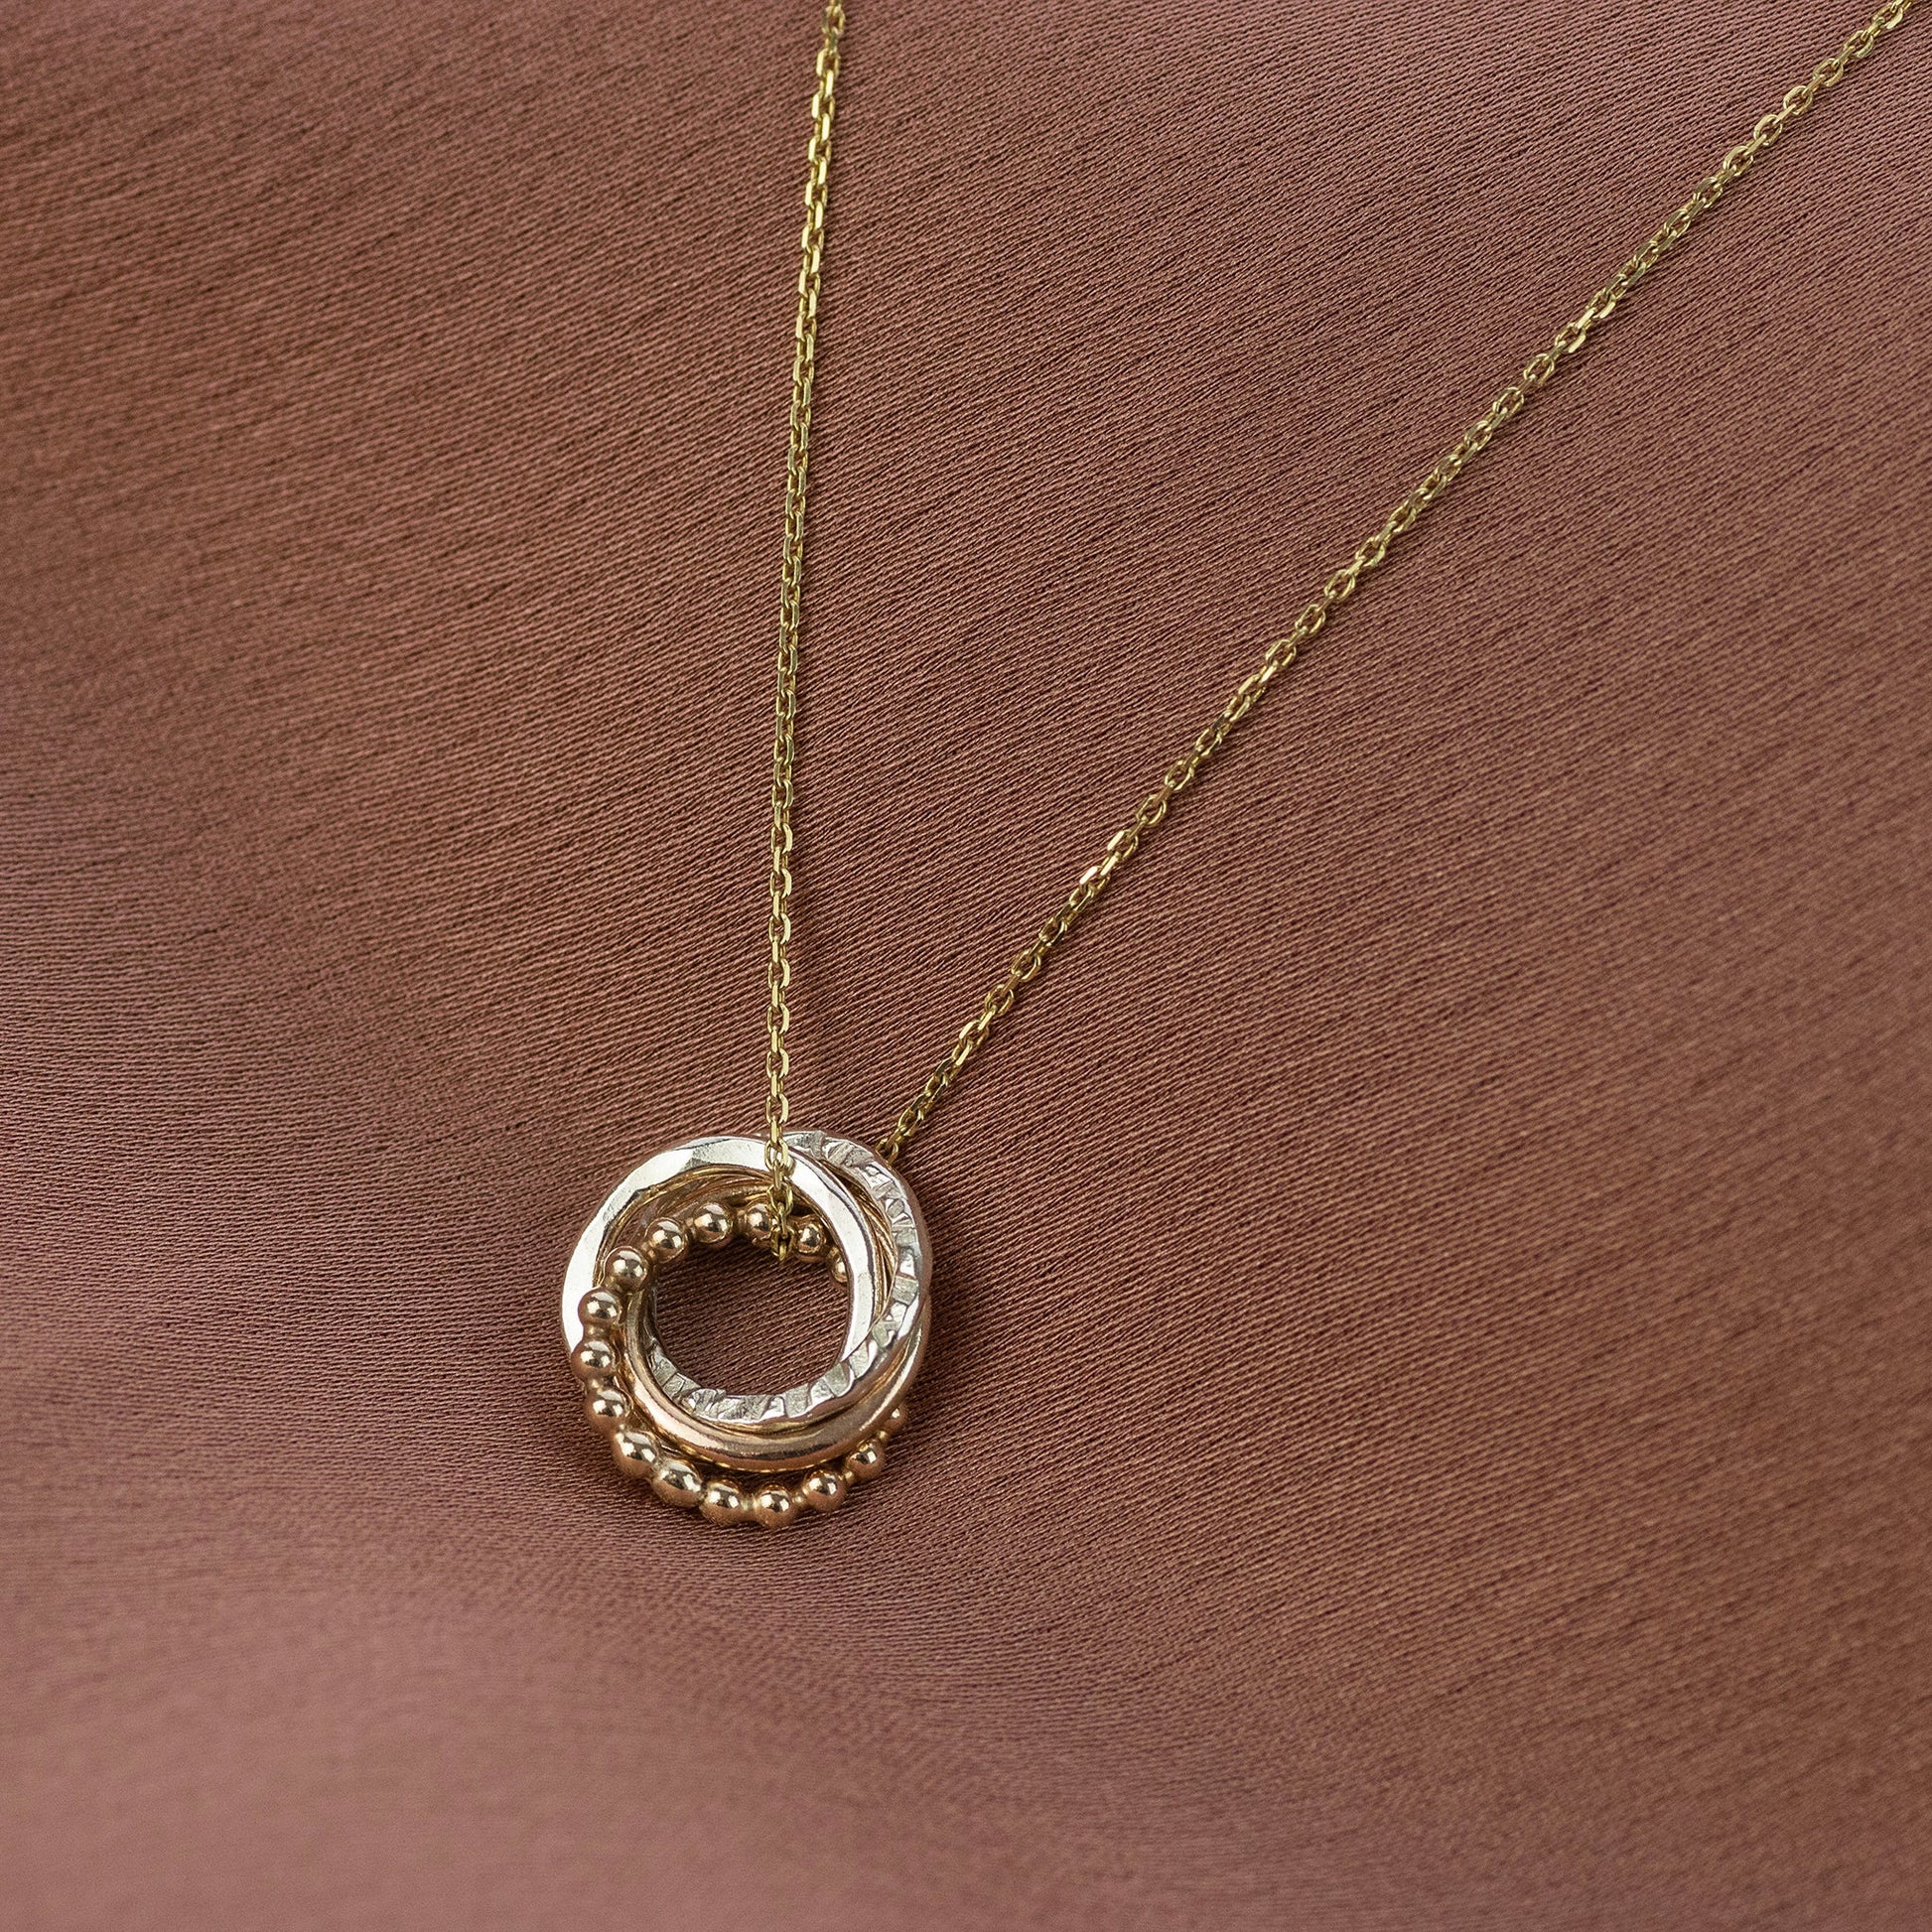 4 Siblings Necklace - 9kt Gold, Rose Gold & Silver Love Knot